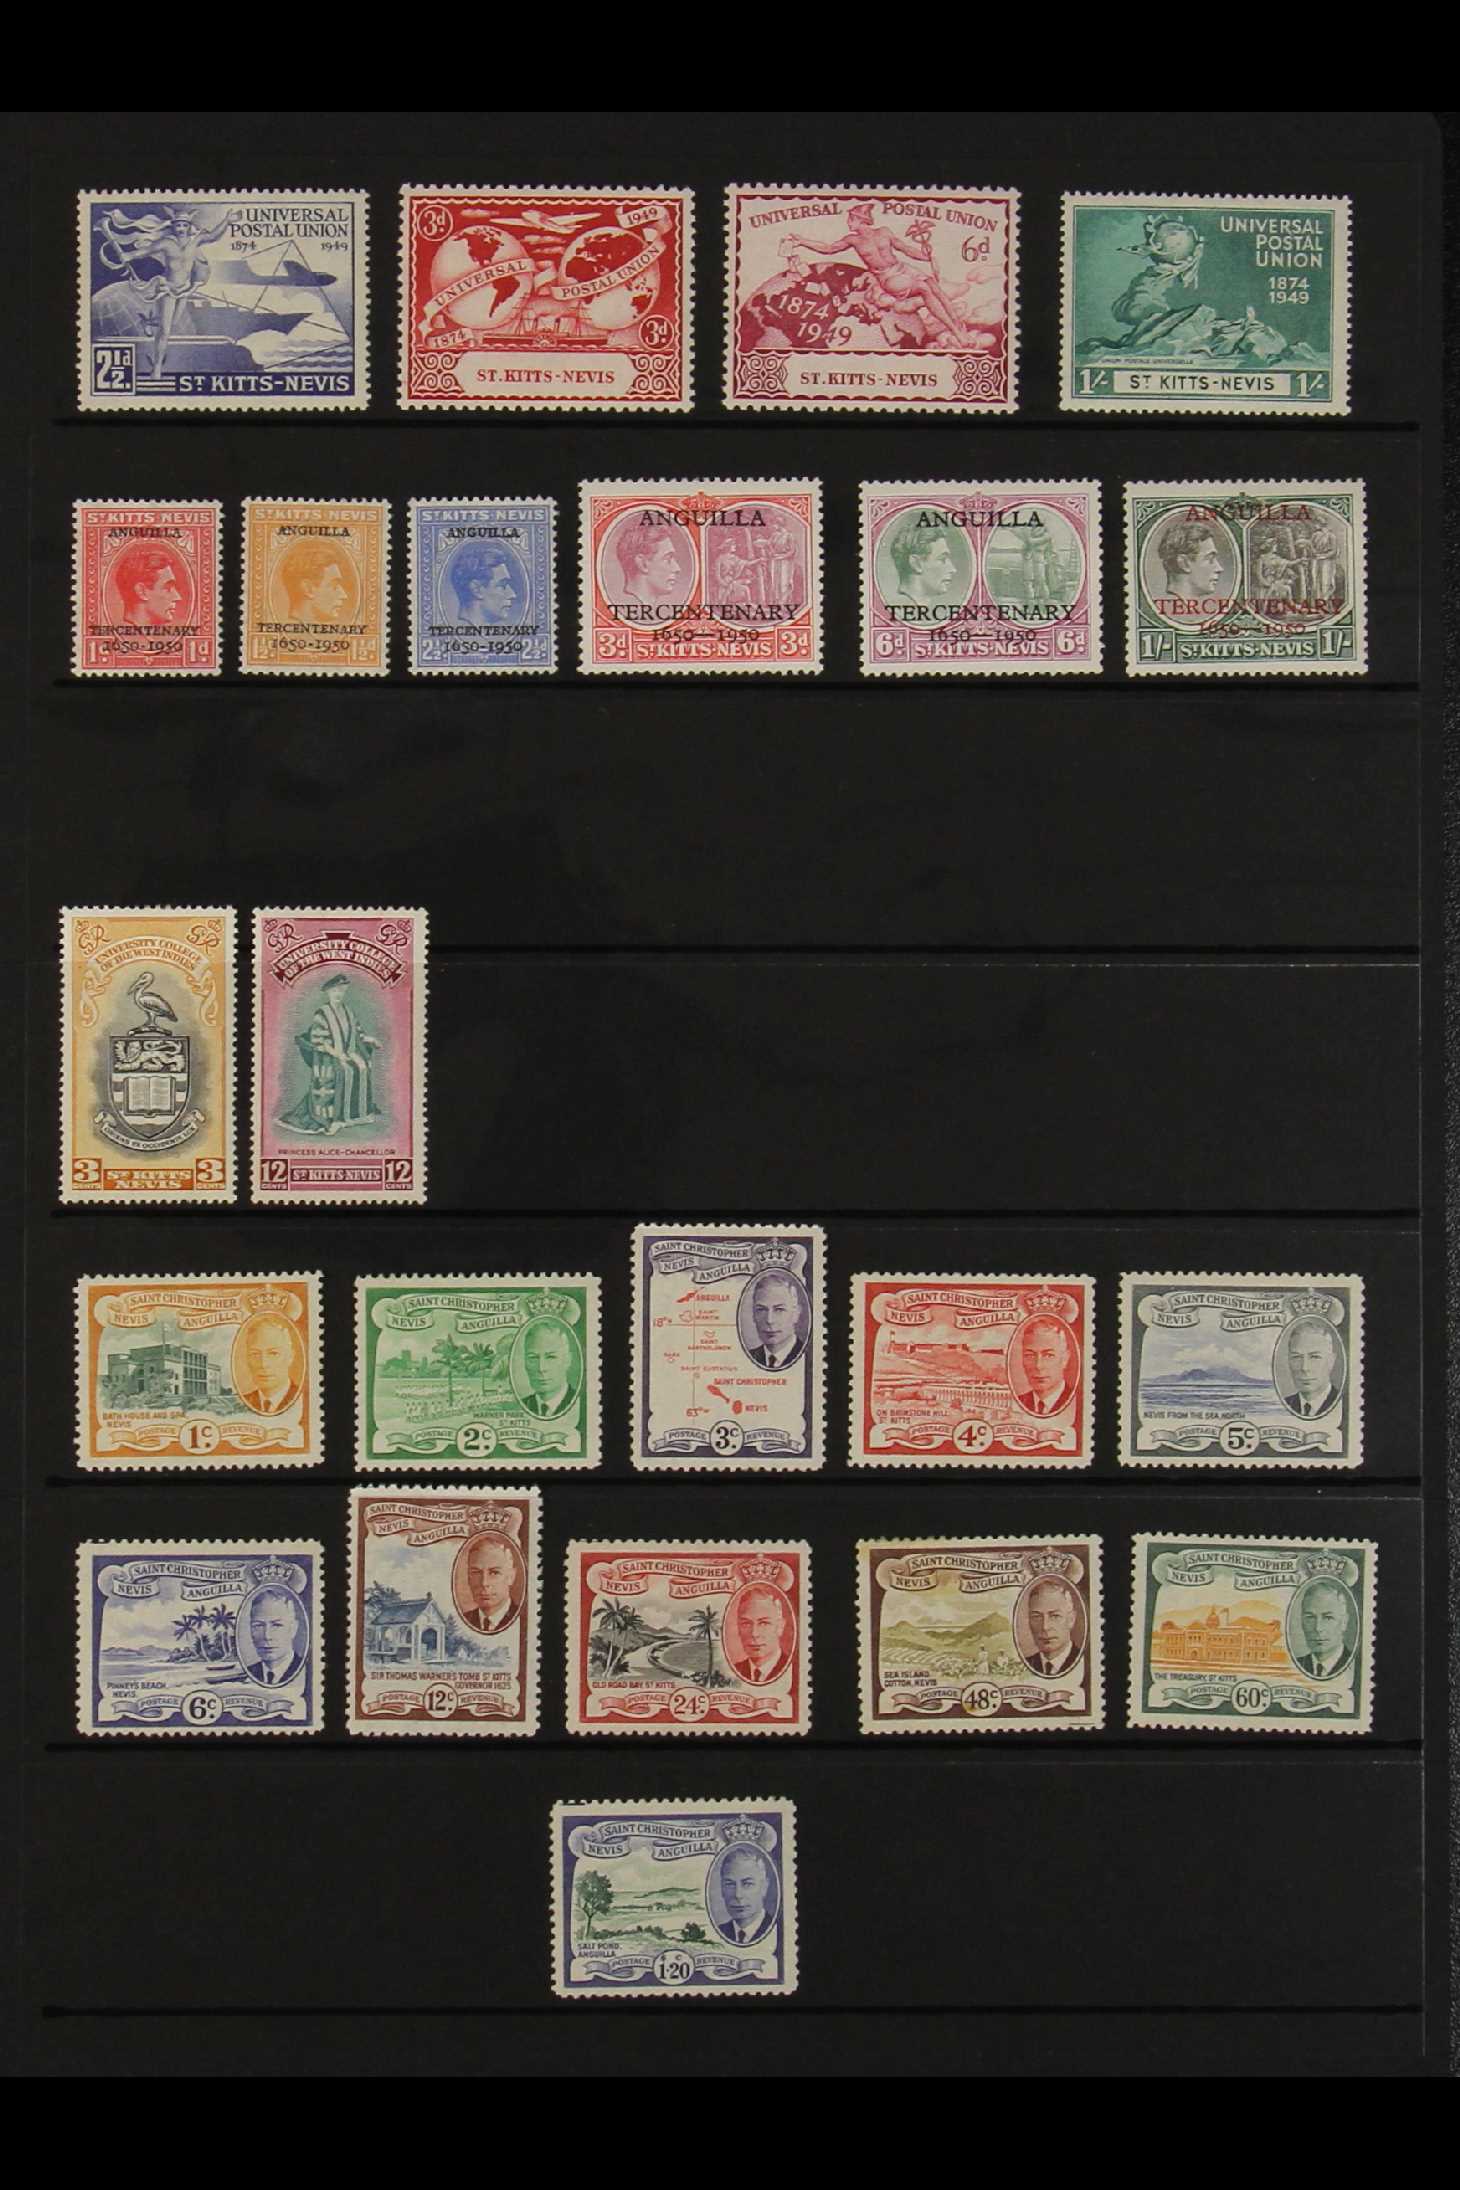 ST KITTS-NEVIS 1937 - 1952 KGVI MINT COLLECTION on Hagner pages with 1938-50 set plus many - Image 2 of 2